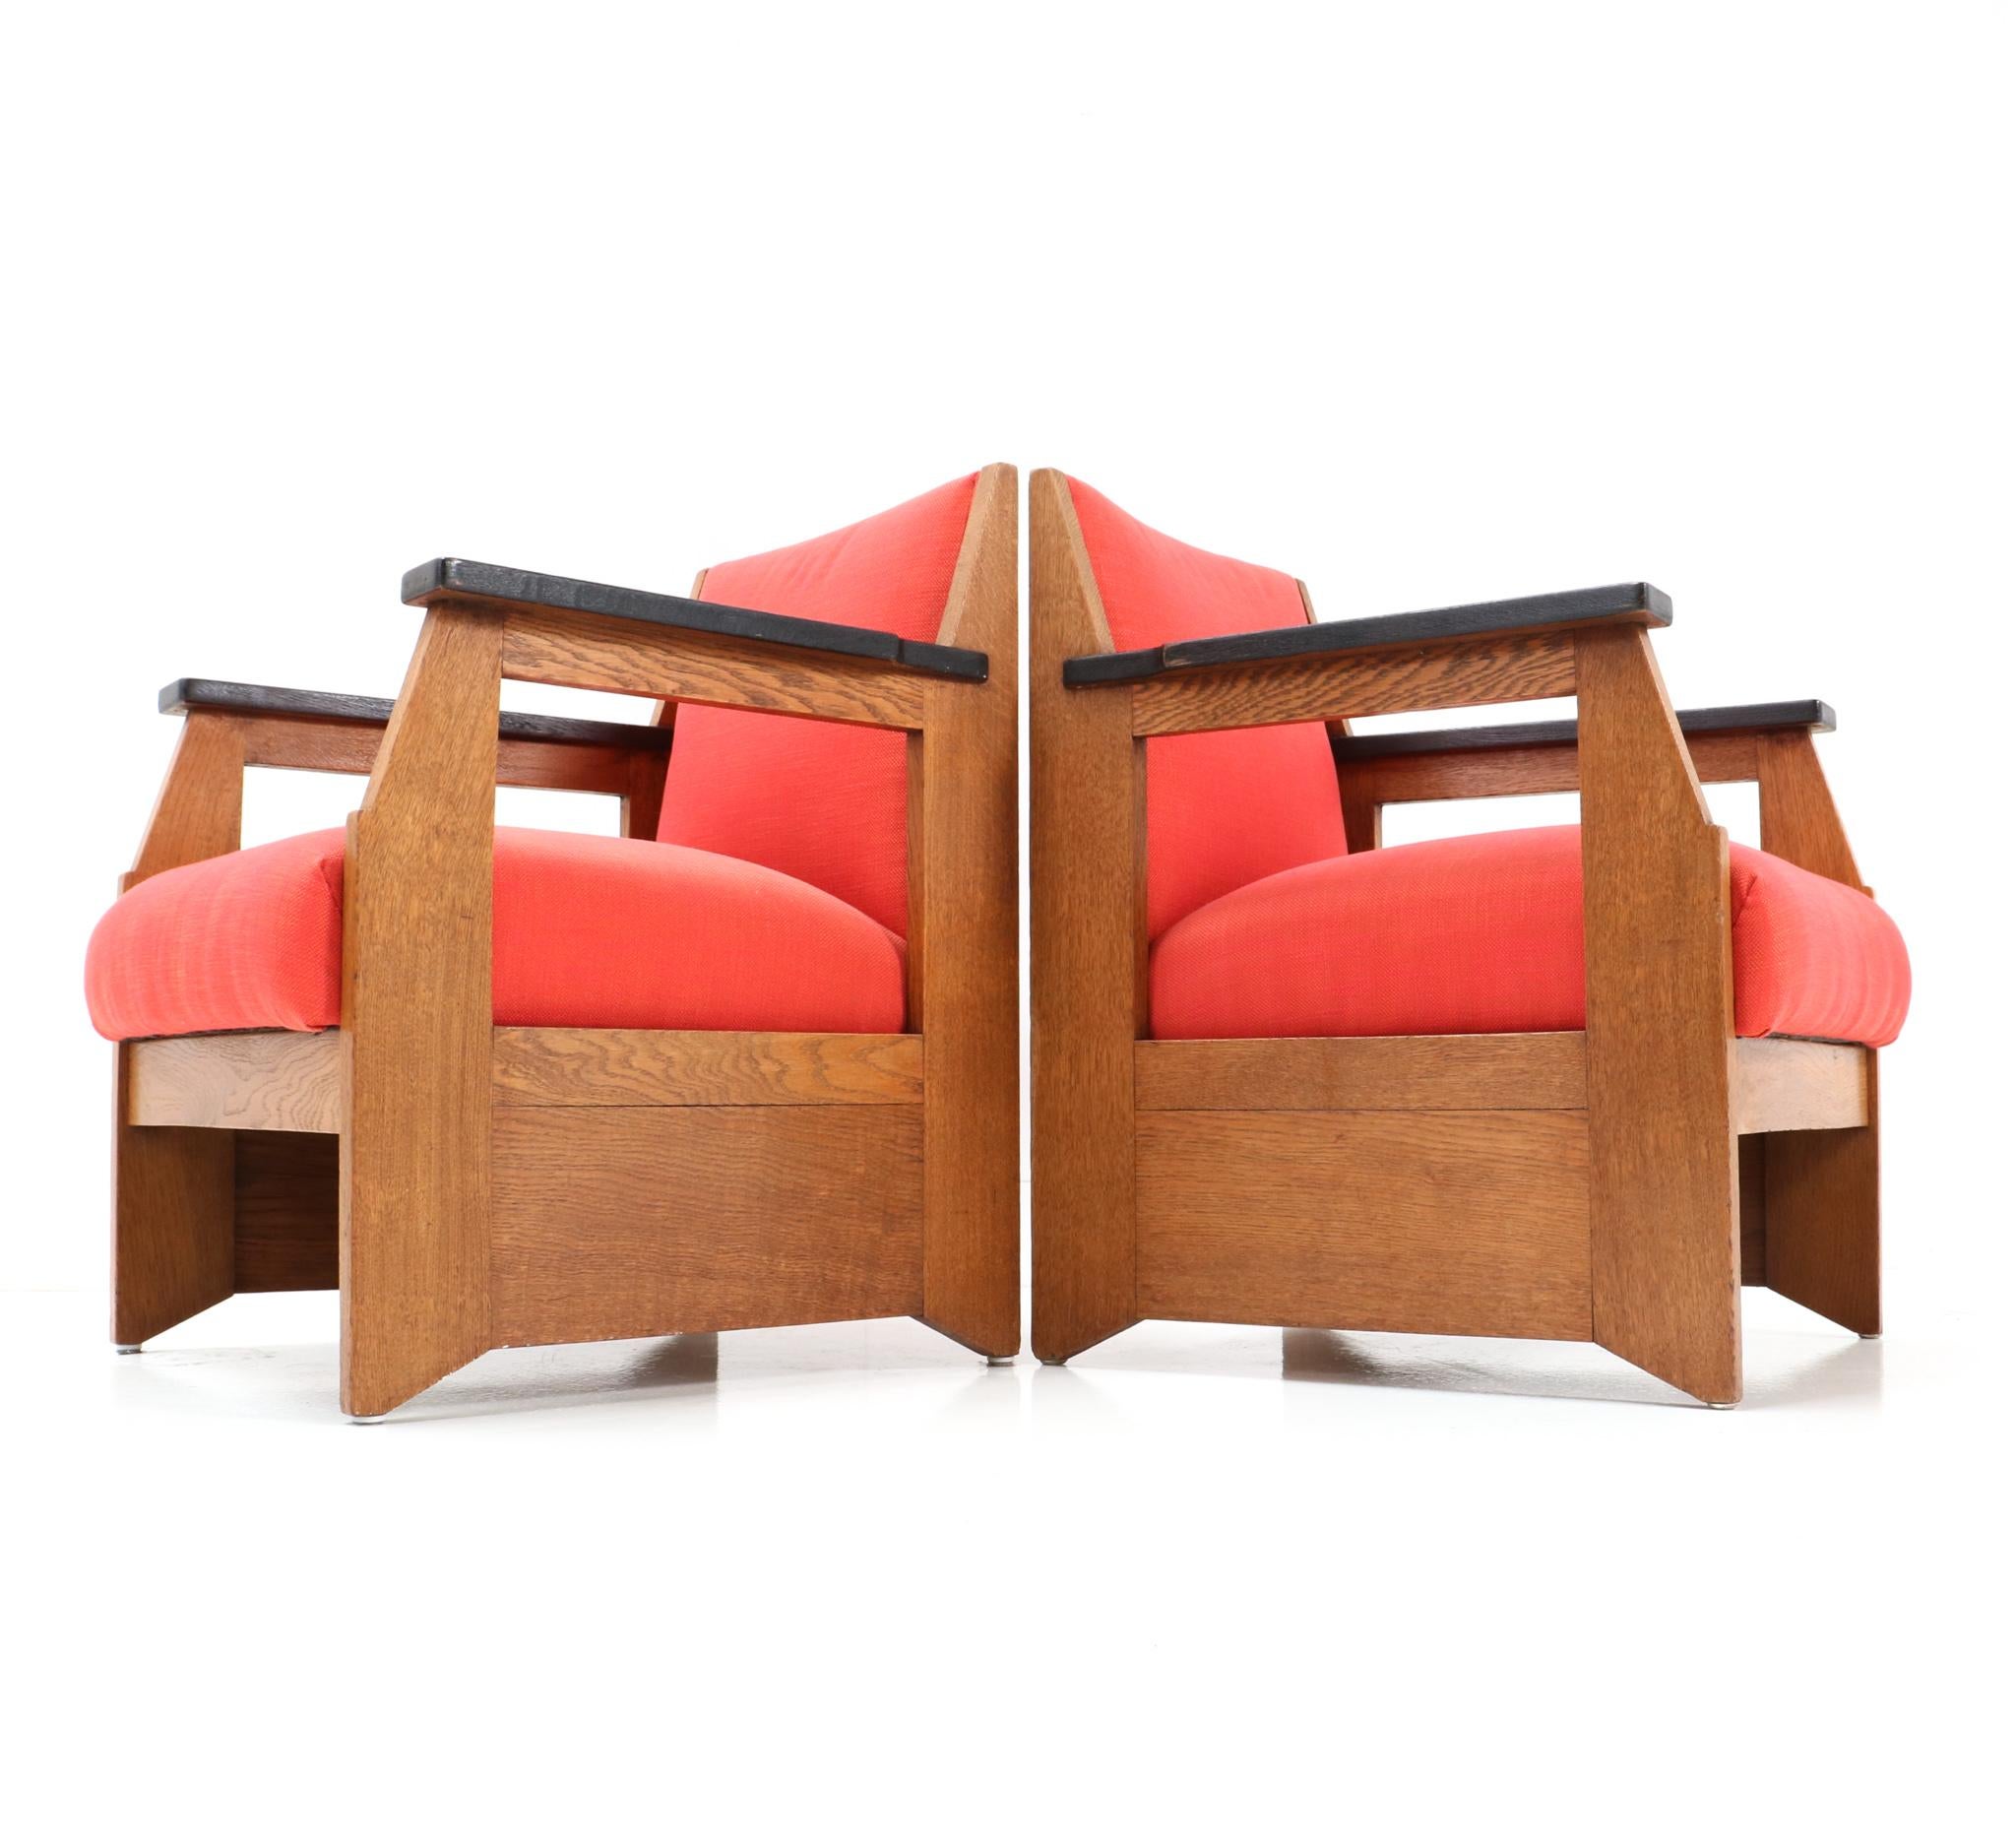 Pair of Oak Art Deco Modernist Easy Chairs by Hendrik Wouda for Pander, 1924 In Good Condition For Sale In Amsterdam, NL